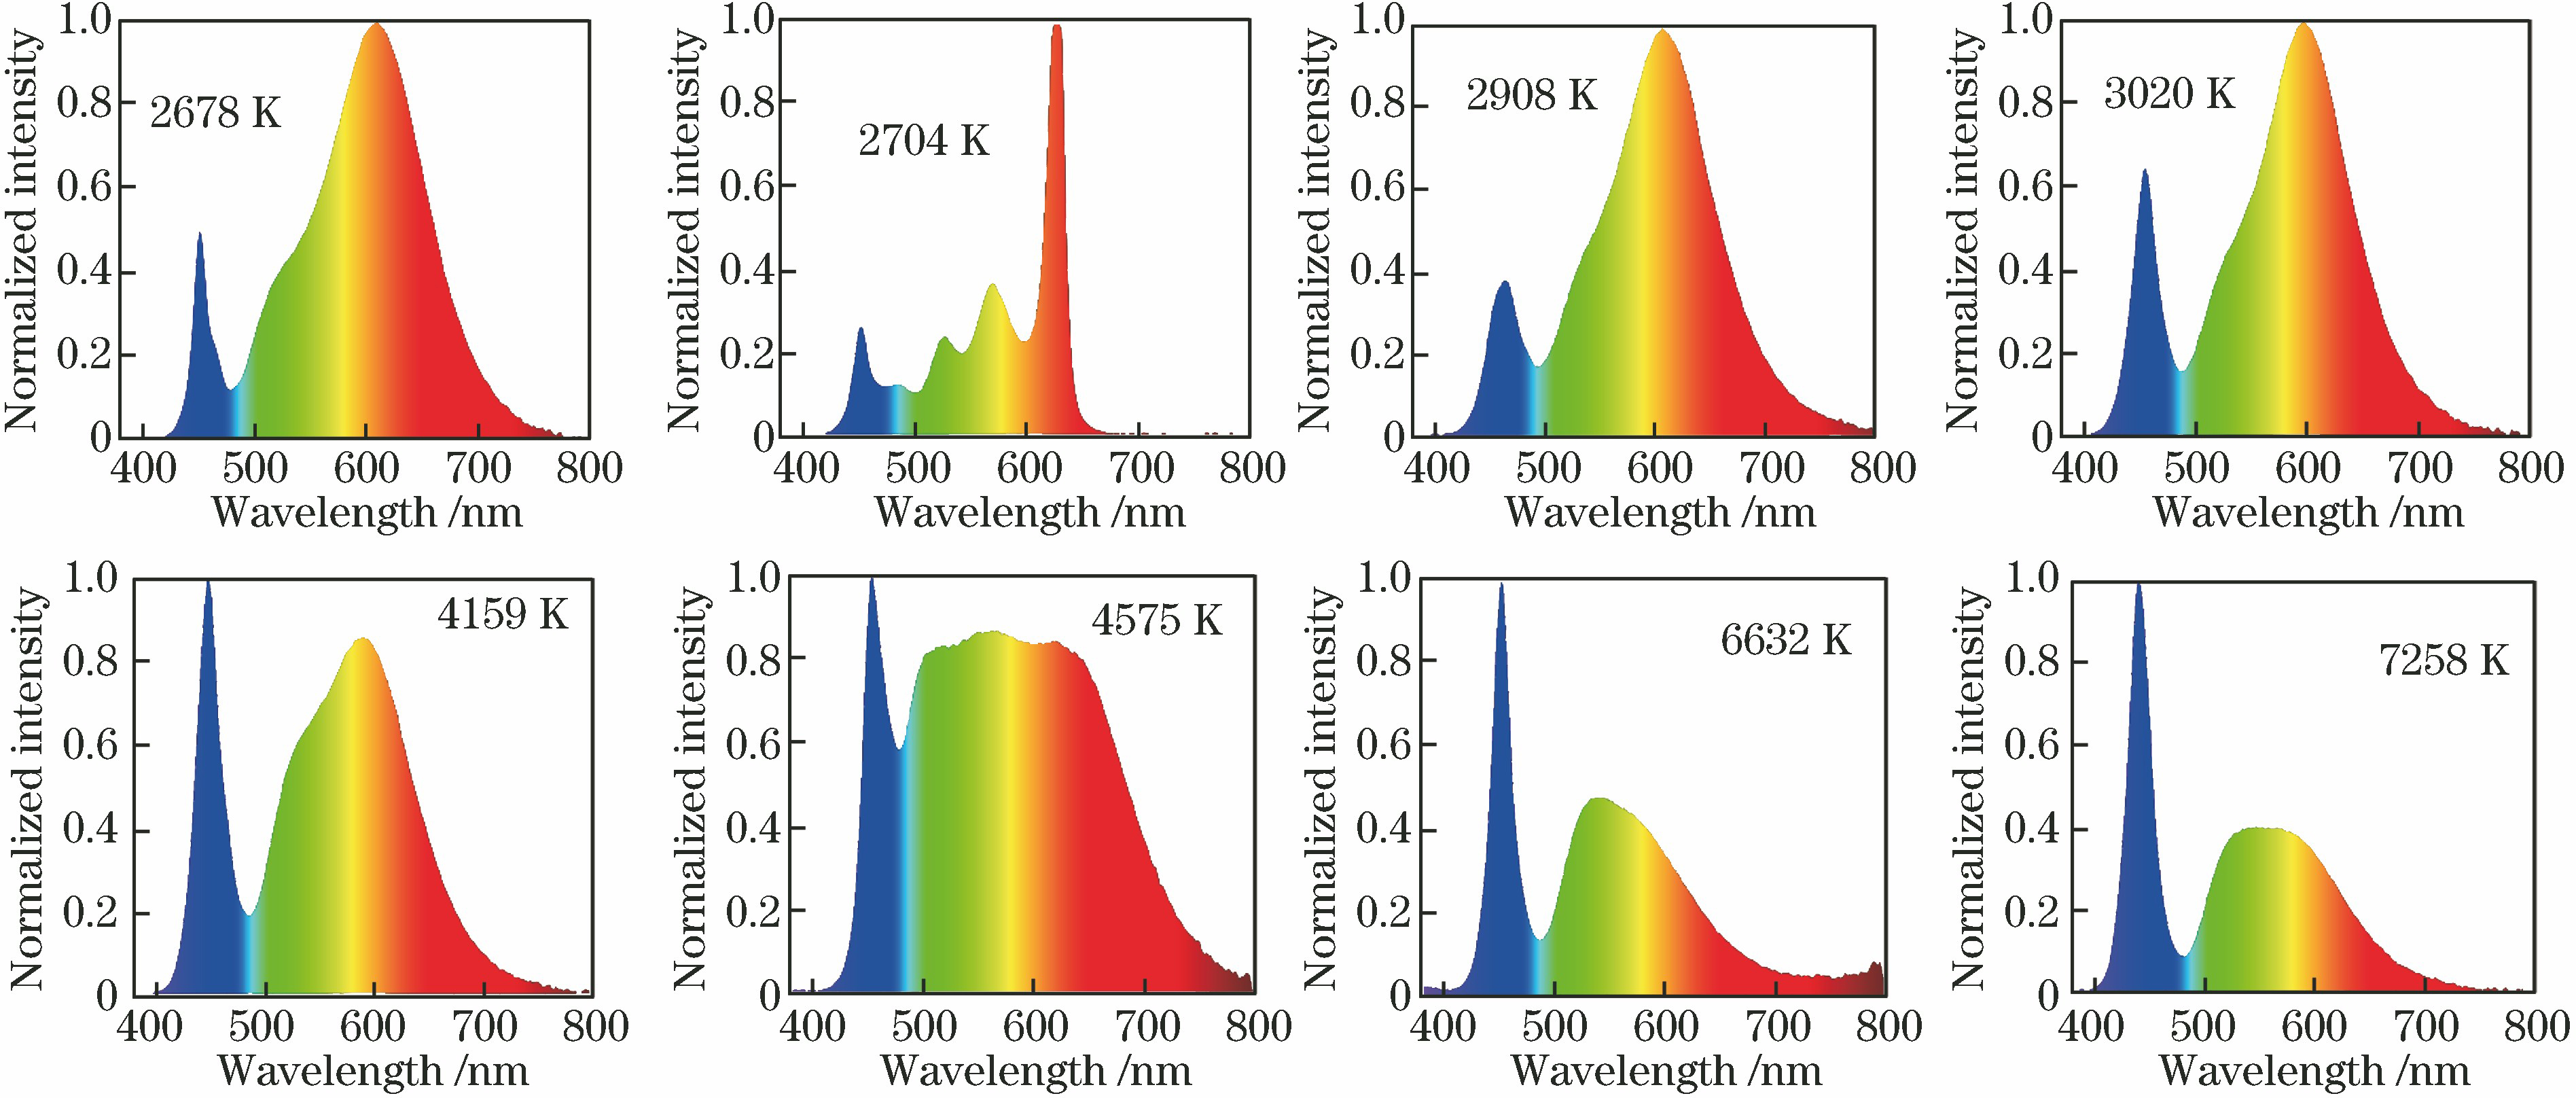 Normalized spectral distributions of LED lighting at different color temperatures